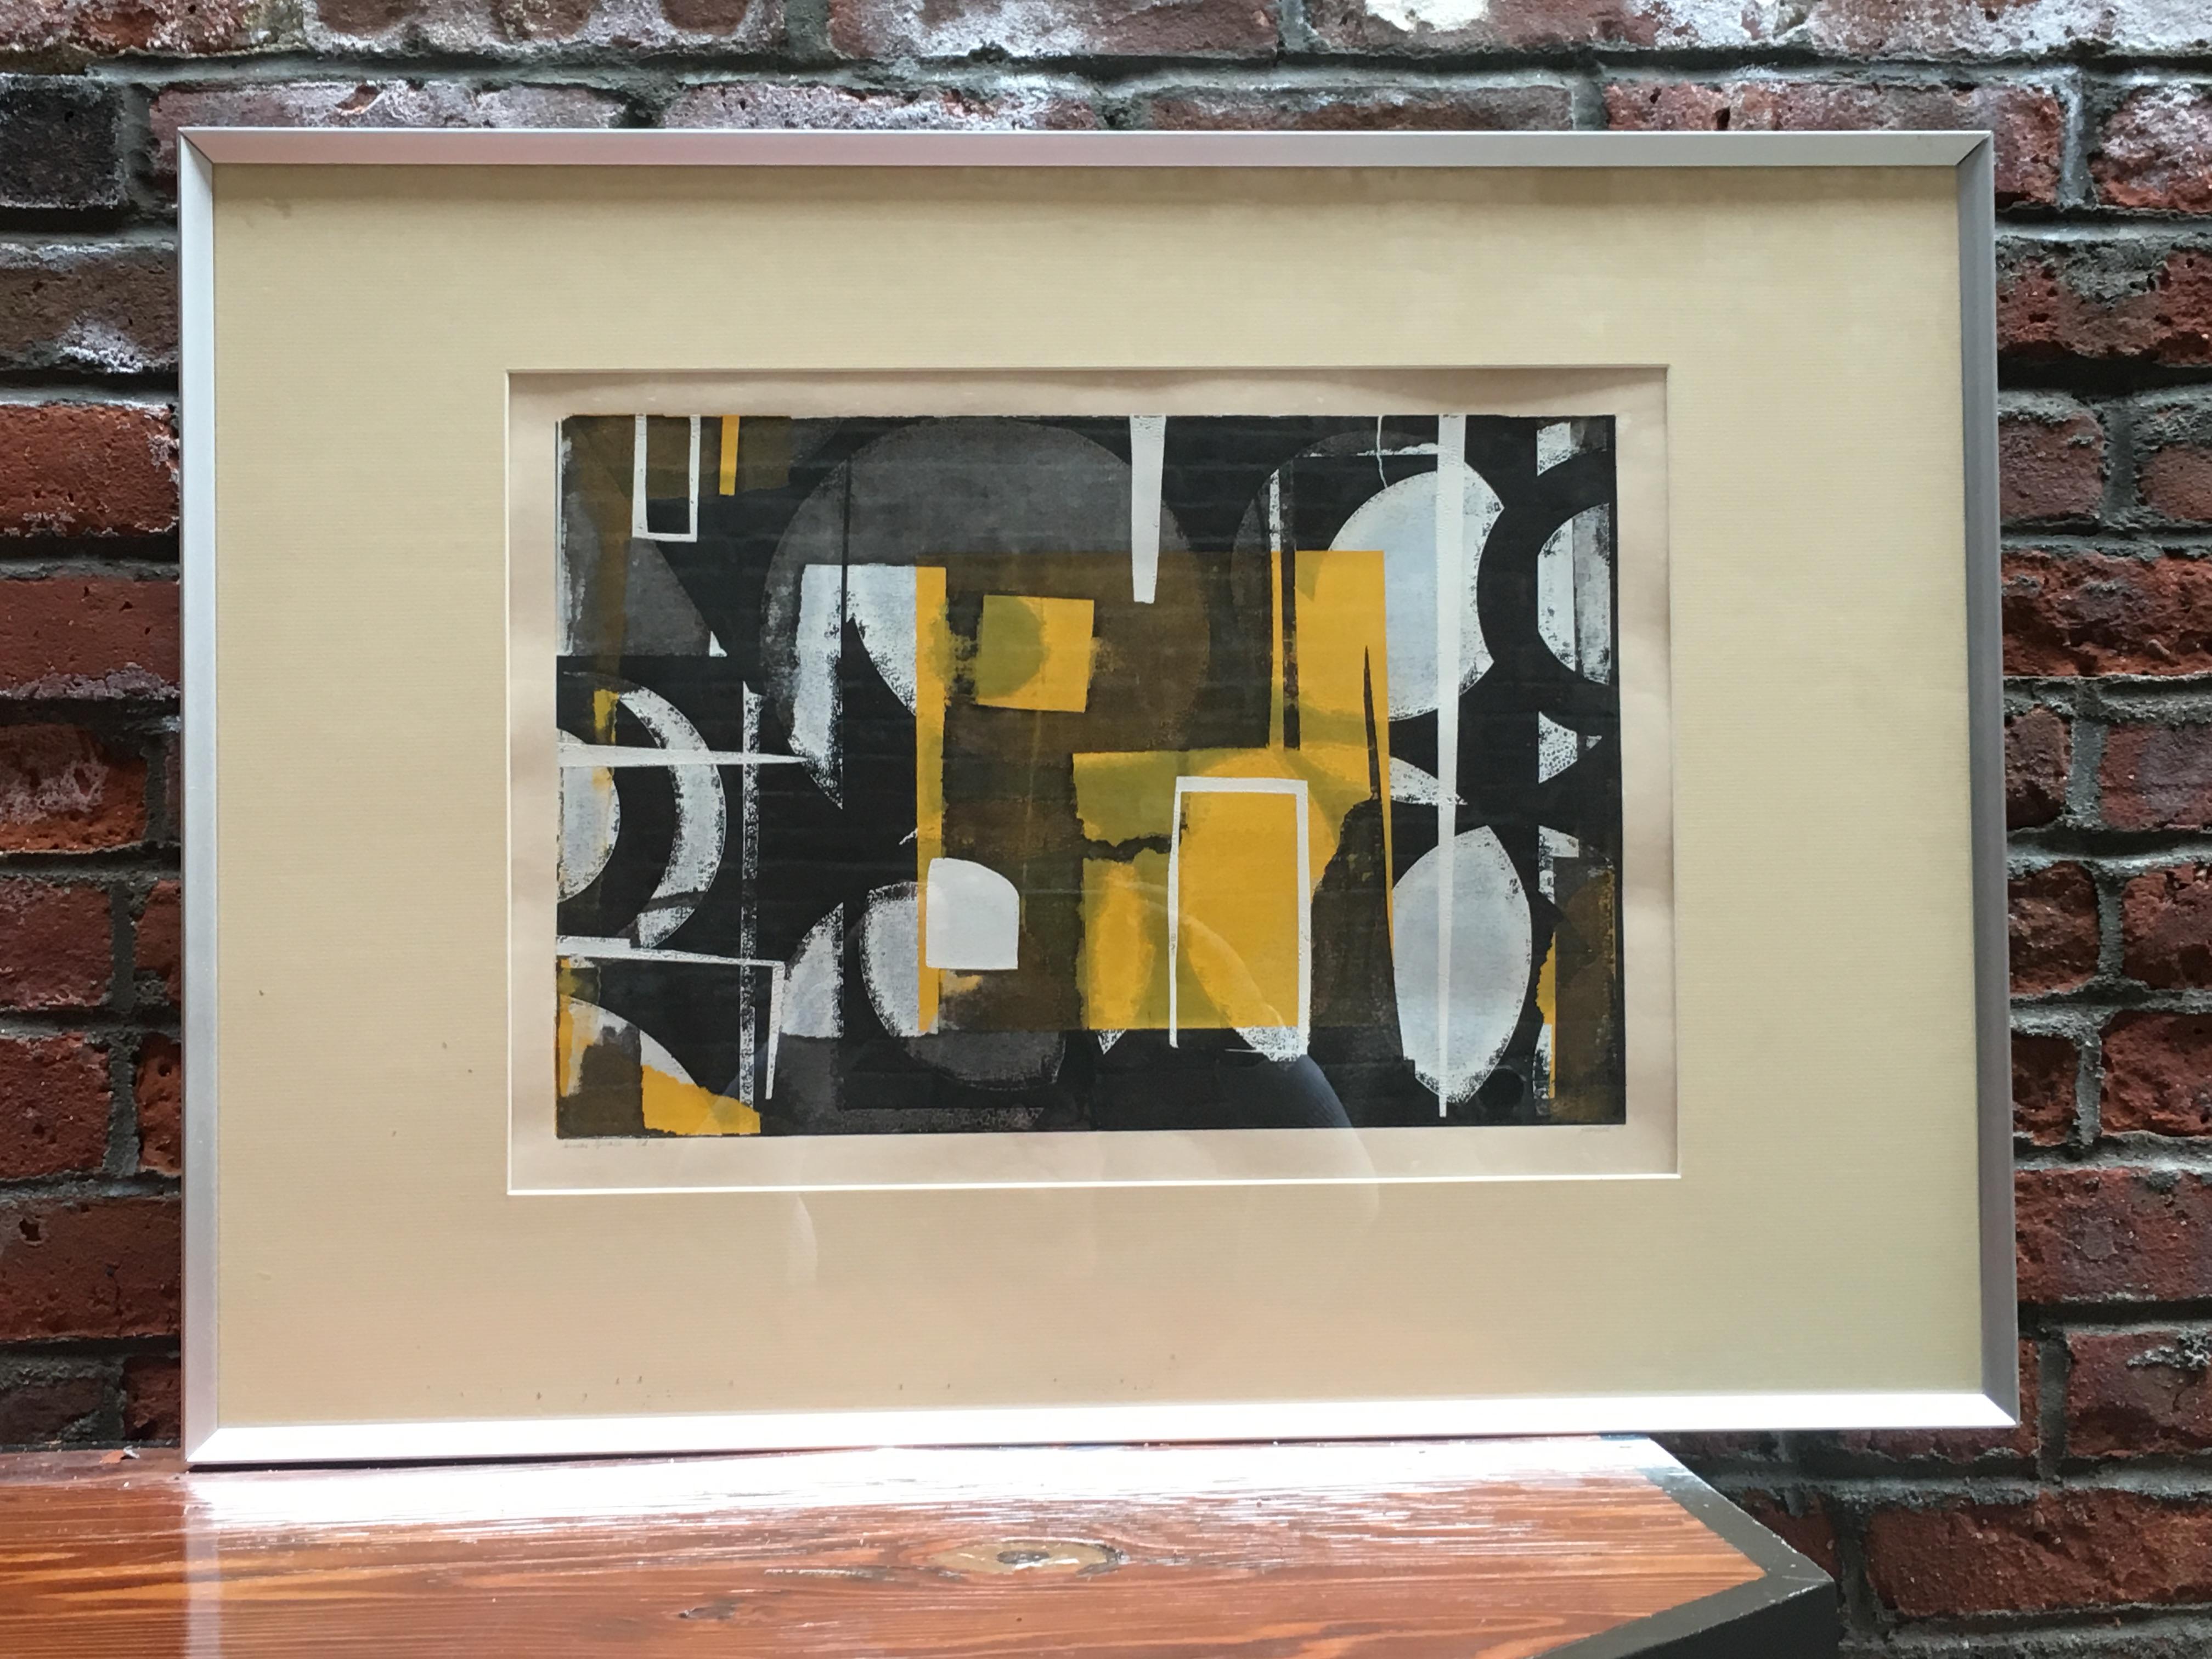 Wonderful abstract serigraph print edition of 10. Pencil signed Parfelt and dated 1970. Abstracted forms in black, yellow and white. The framing treatment consists of a brushed metal frame, matted and under glass. The piece has not been viewed out